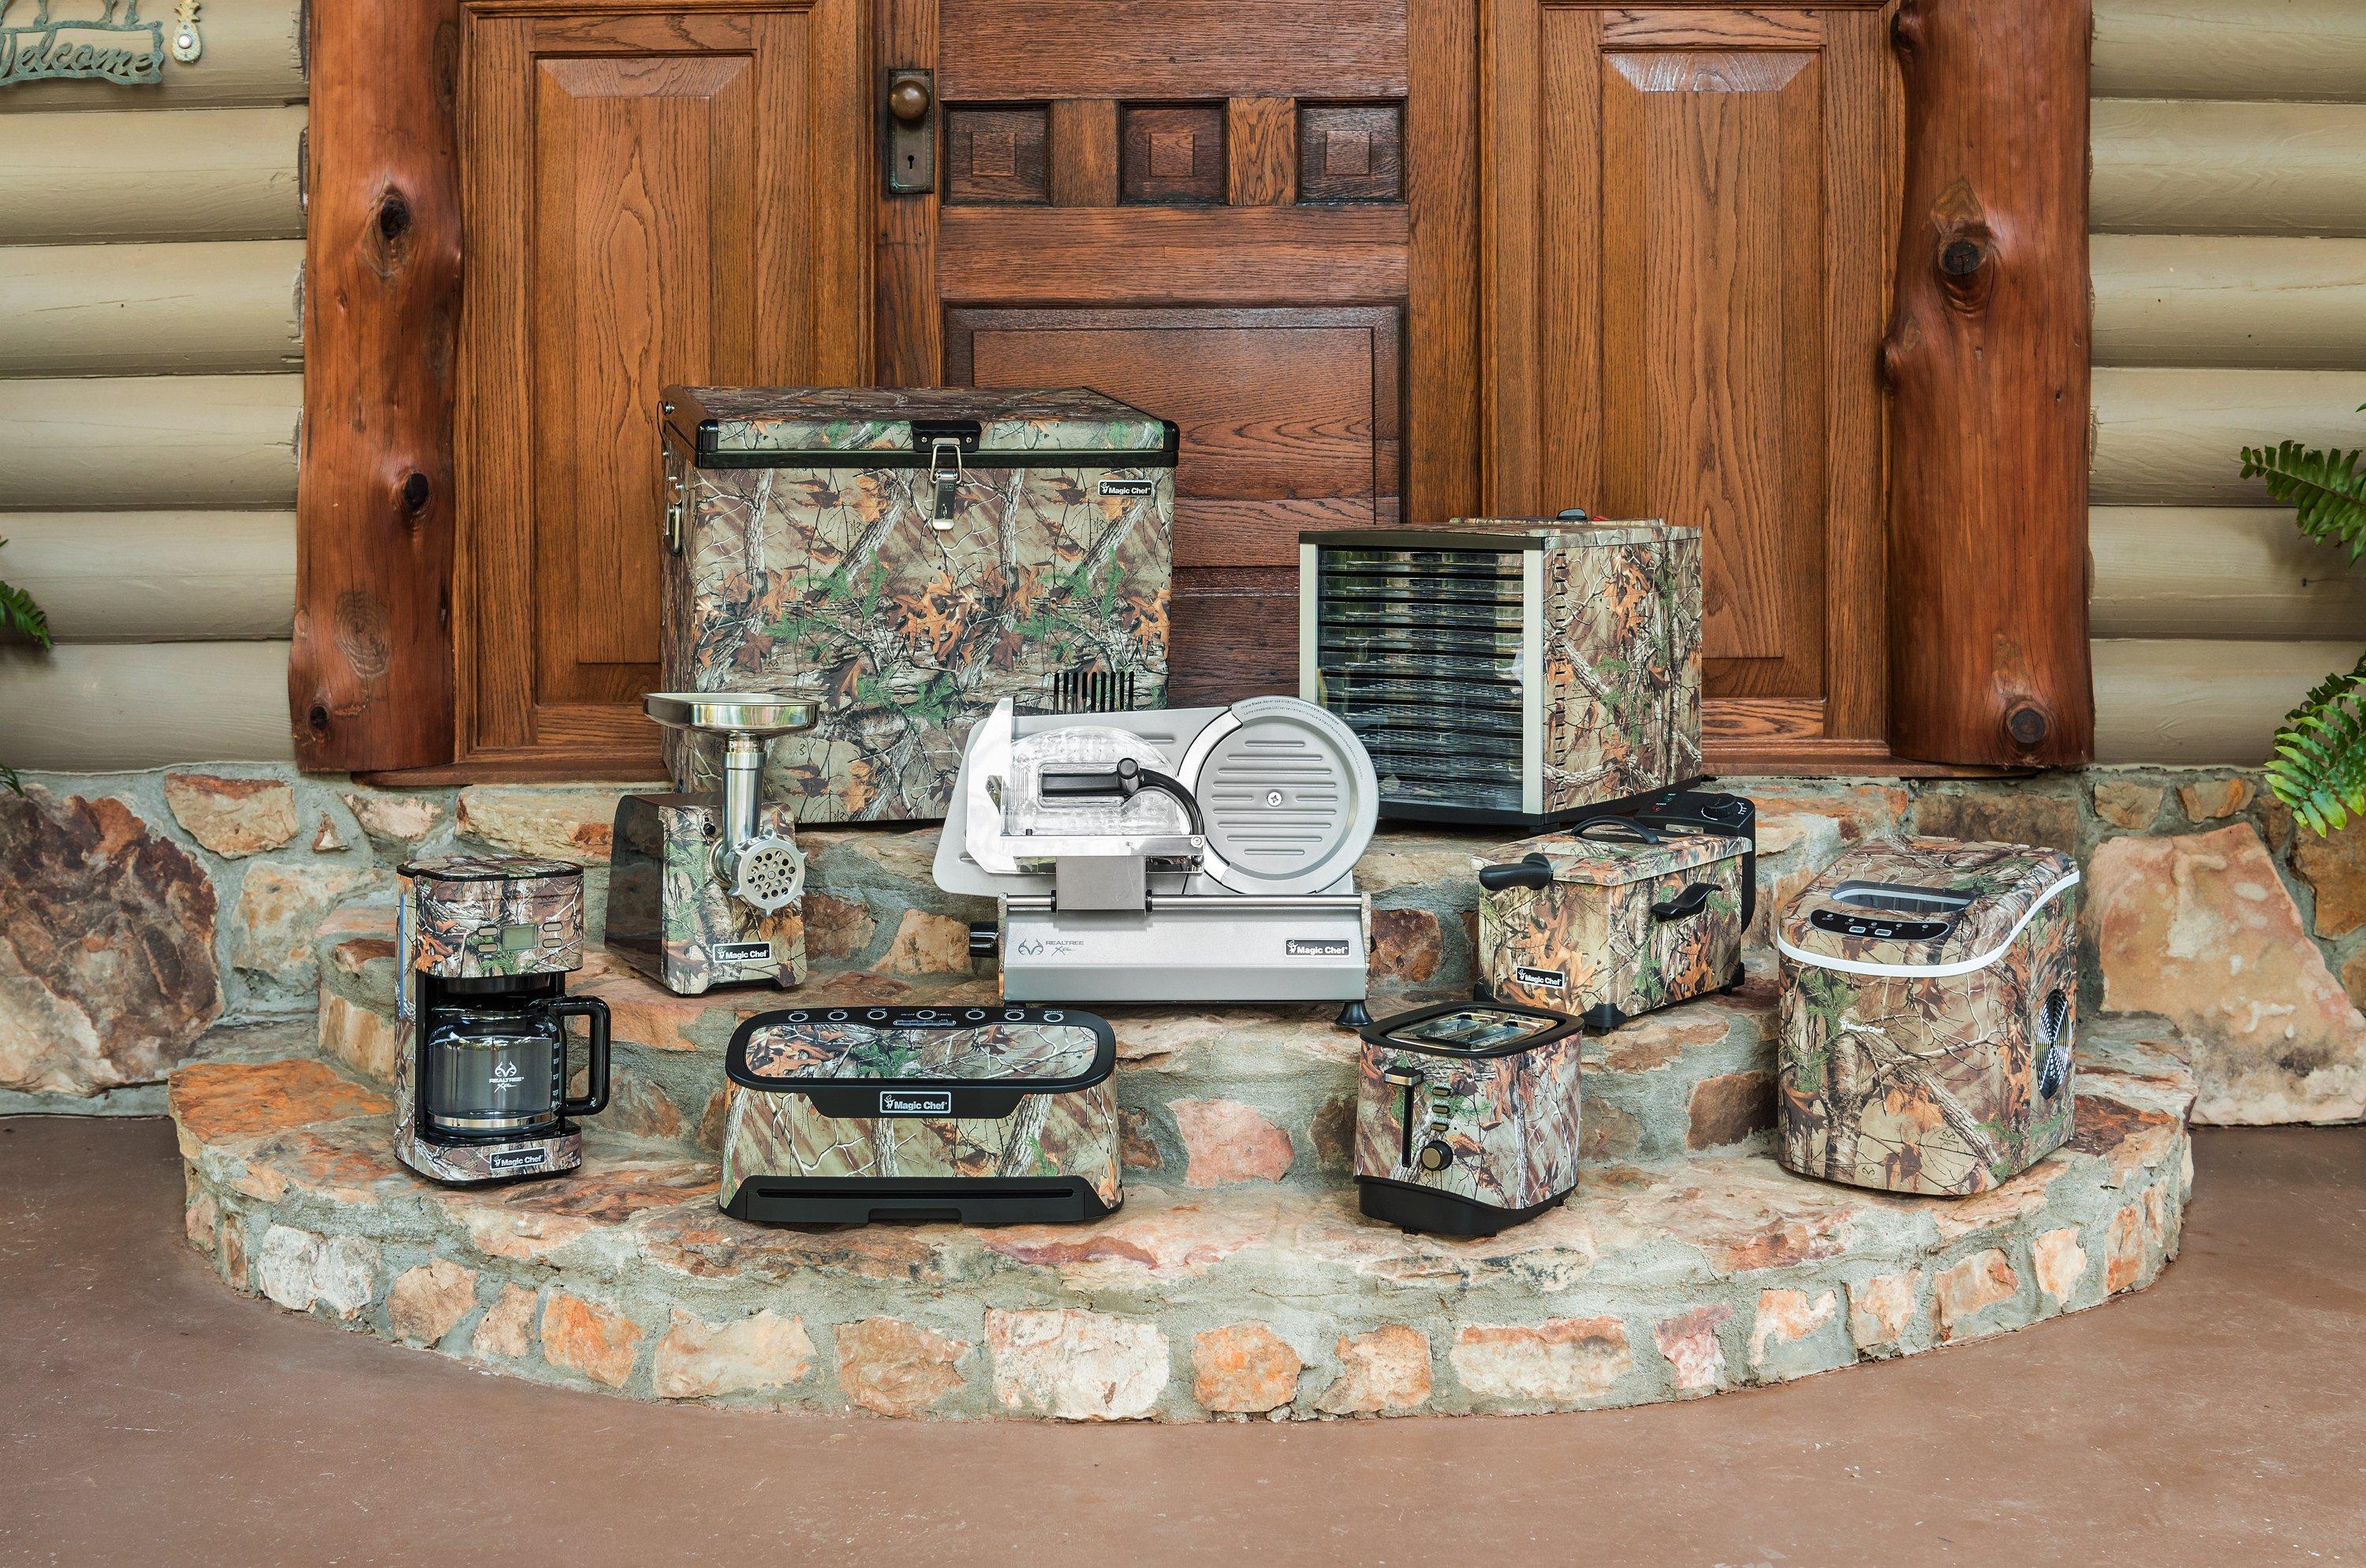 The Magic Chef Realtree line has something for just about any Dad.